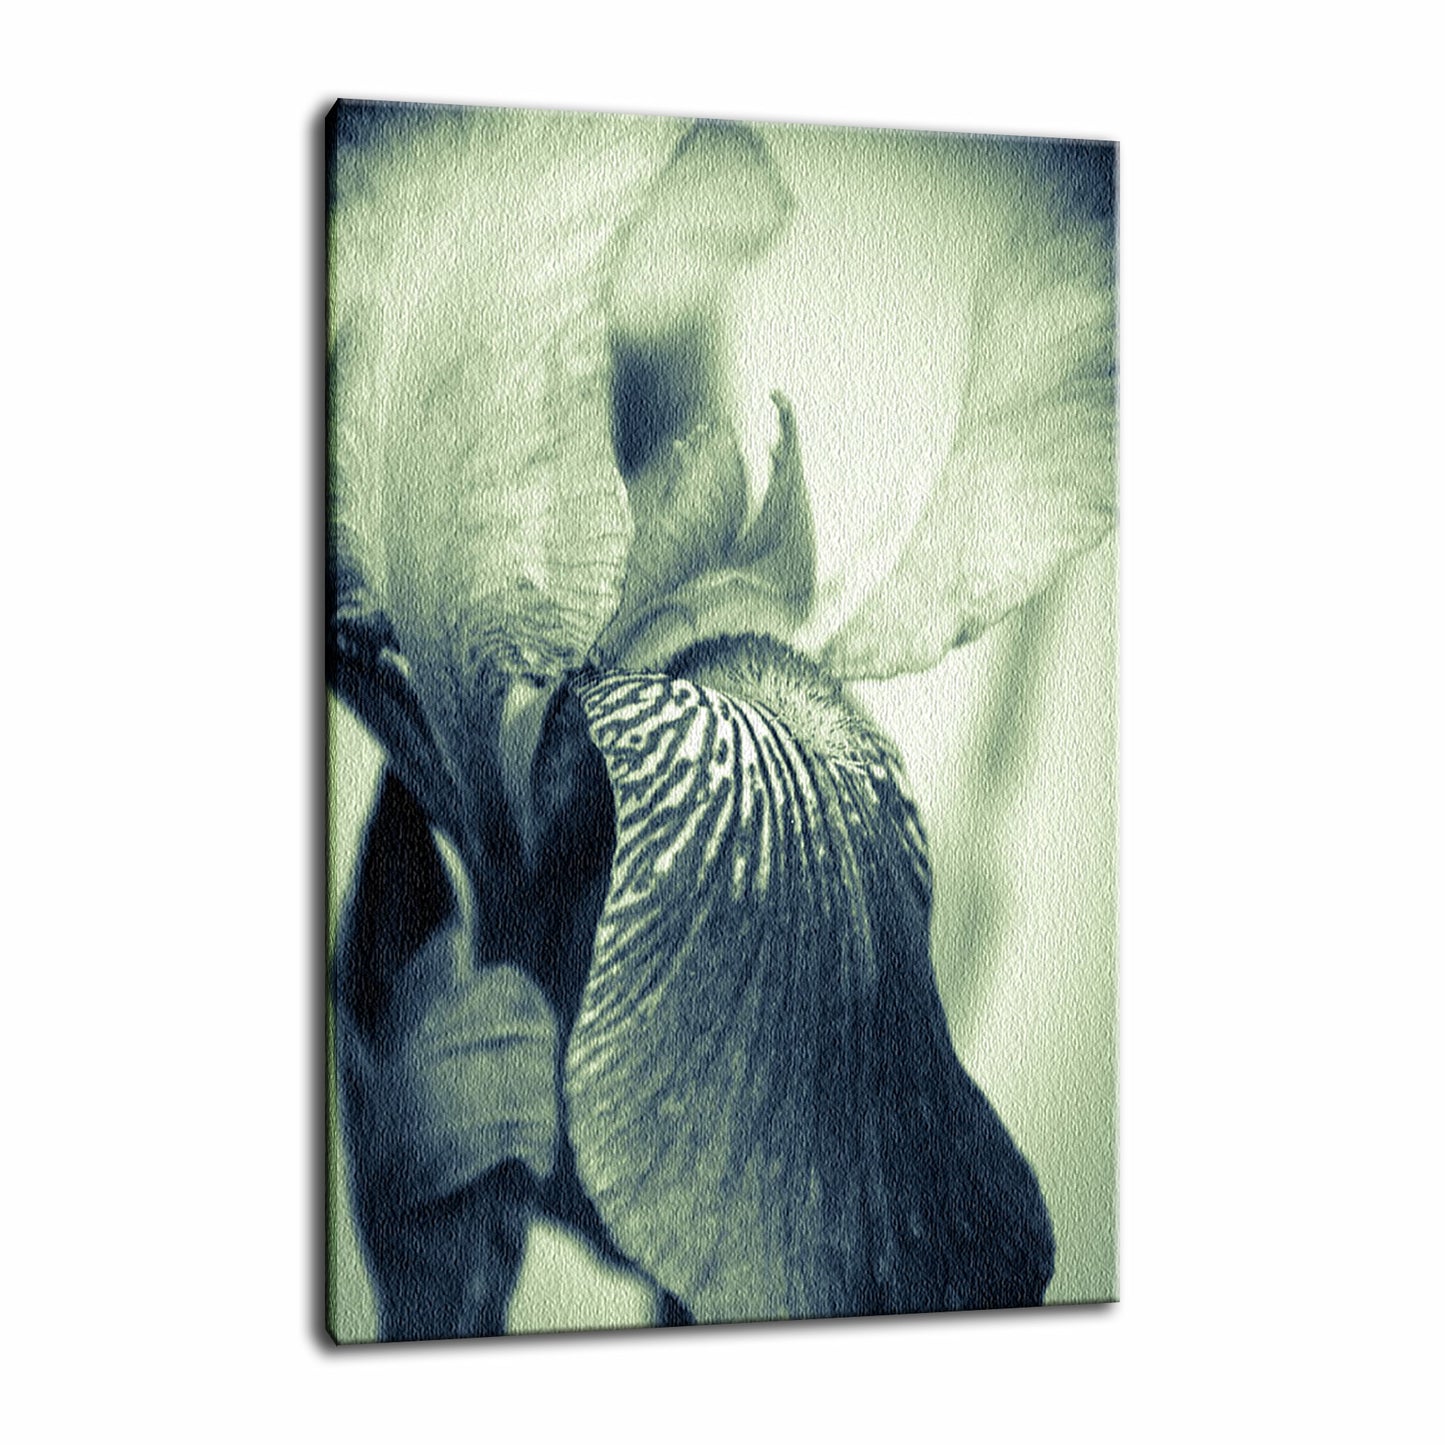 Rustic Canvas Wall Art: Abstract Japanese Iris Delight Nature / Floral Photo Fine Art Canvas Wall Art Prints  - PIPAFINEART